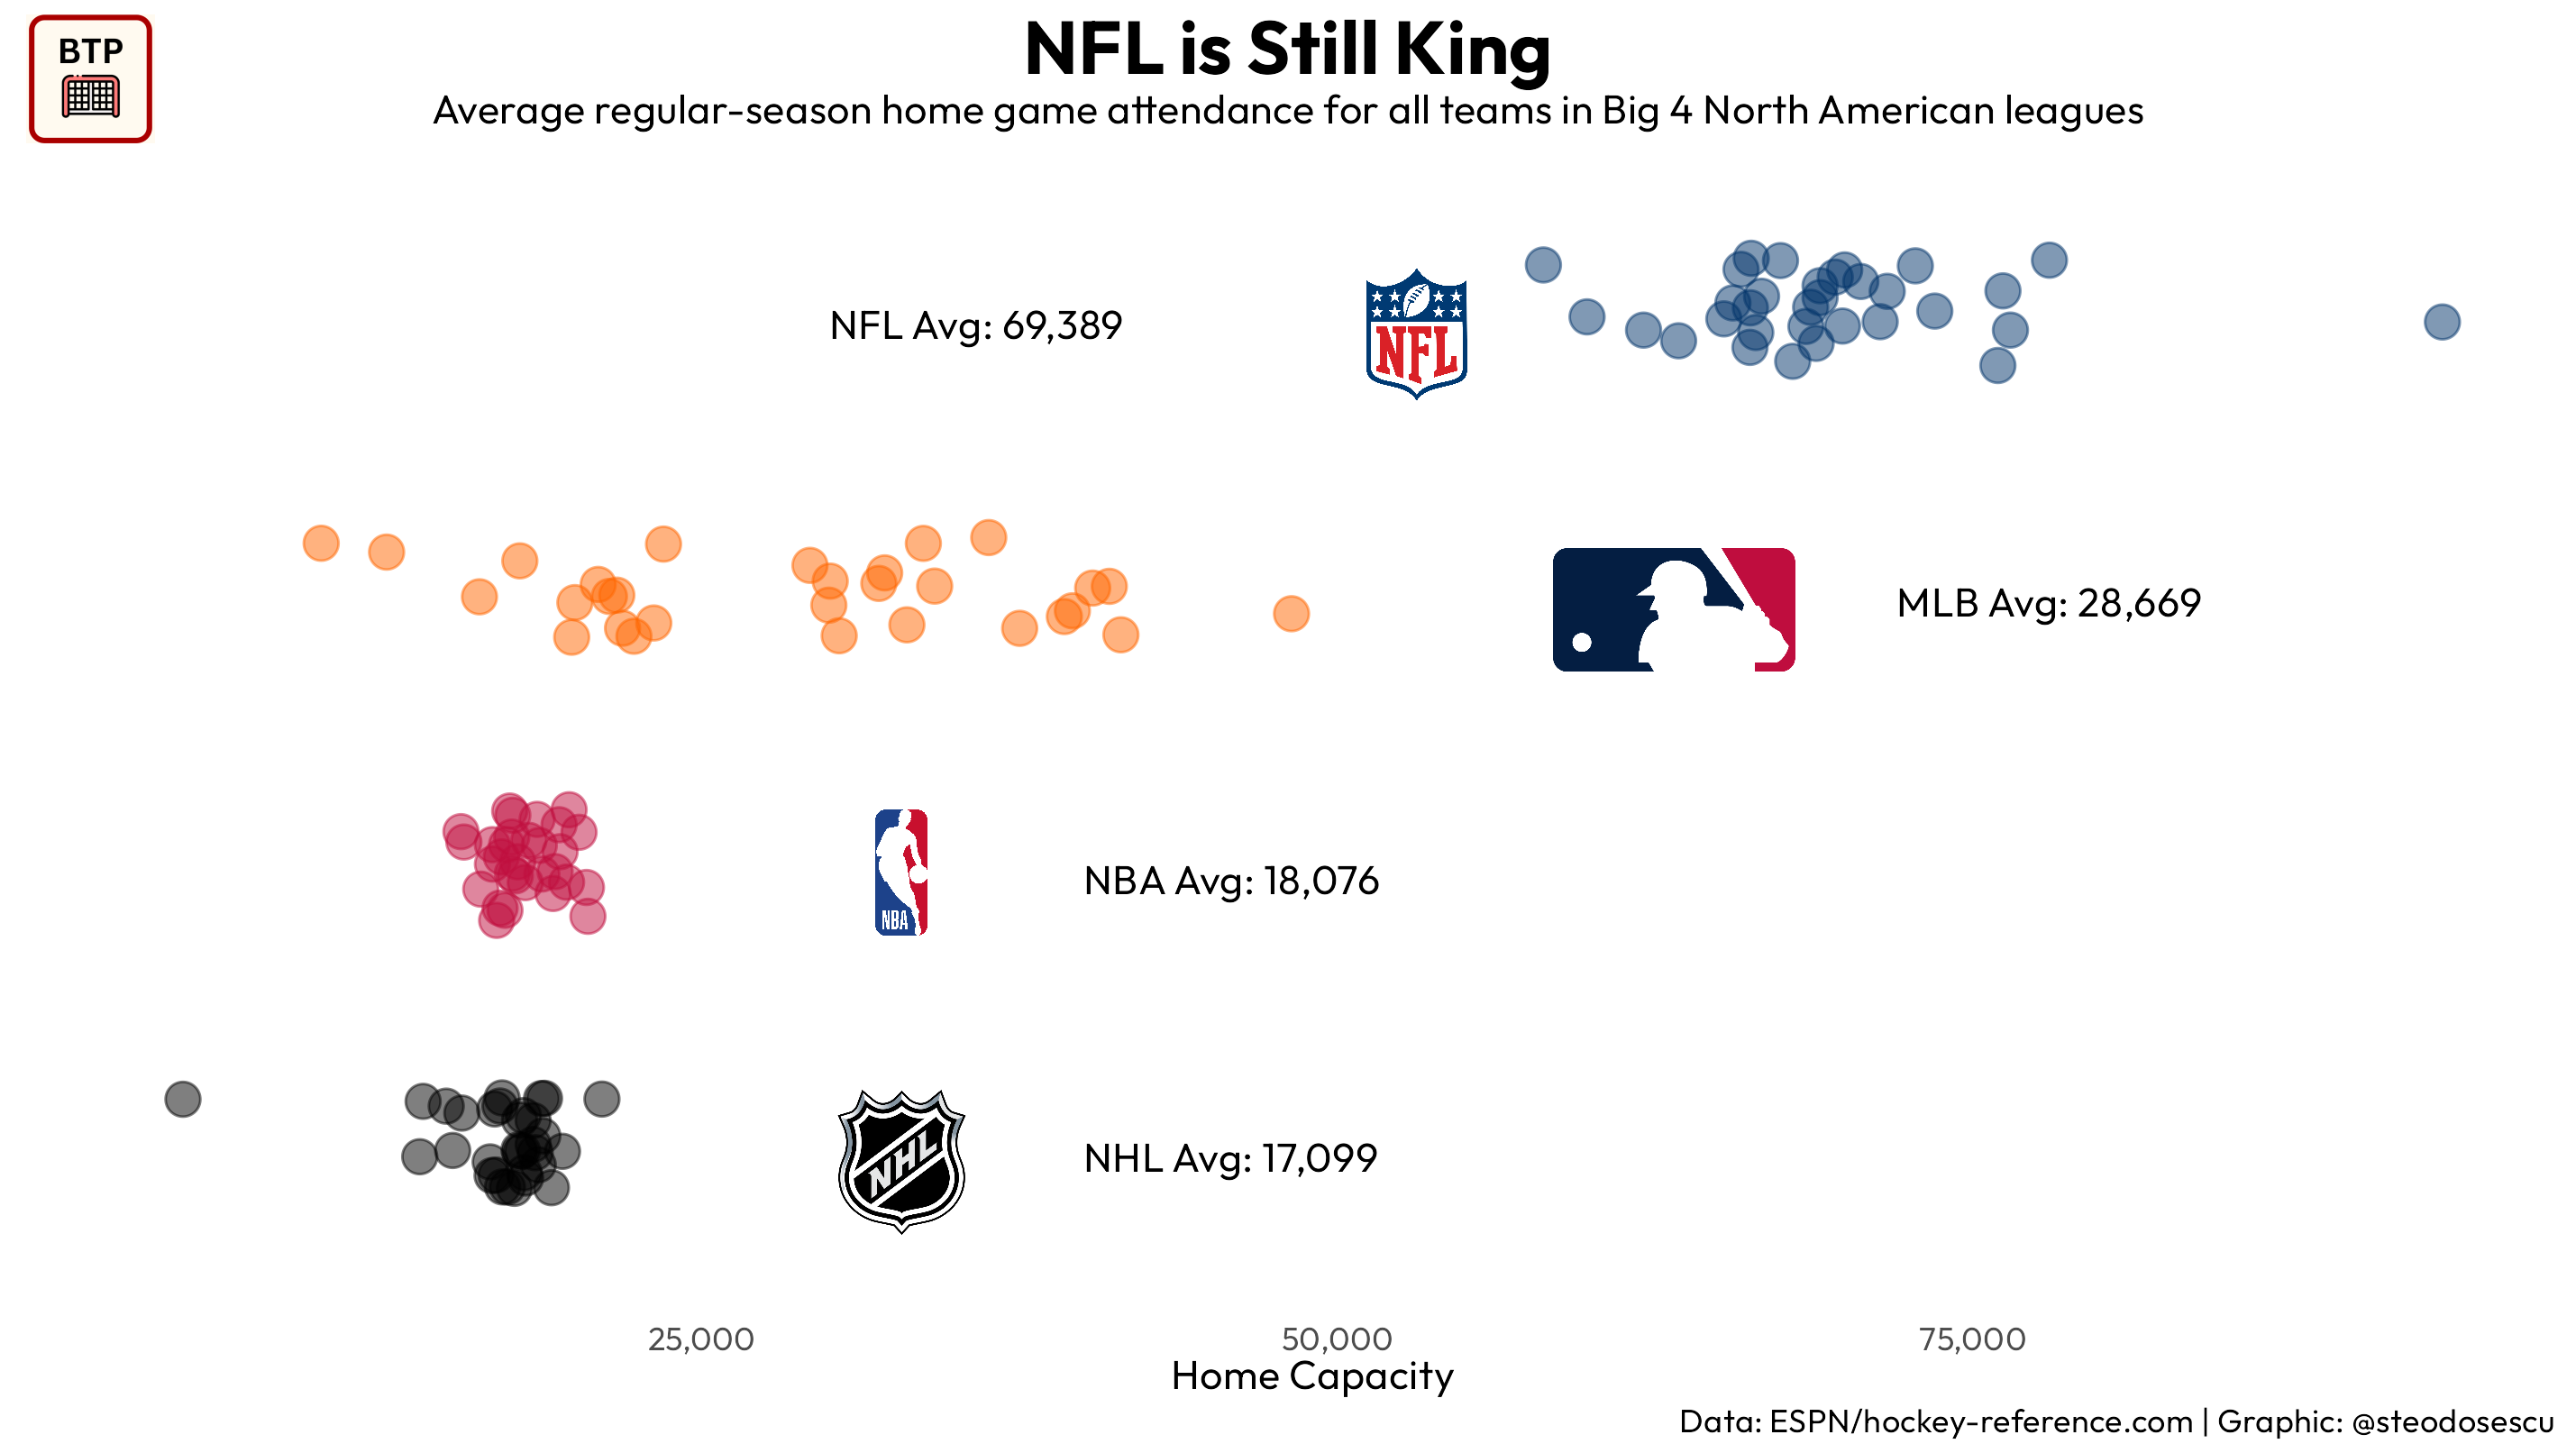 NFL is King